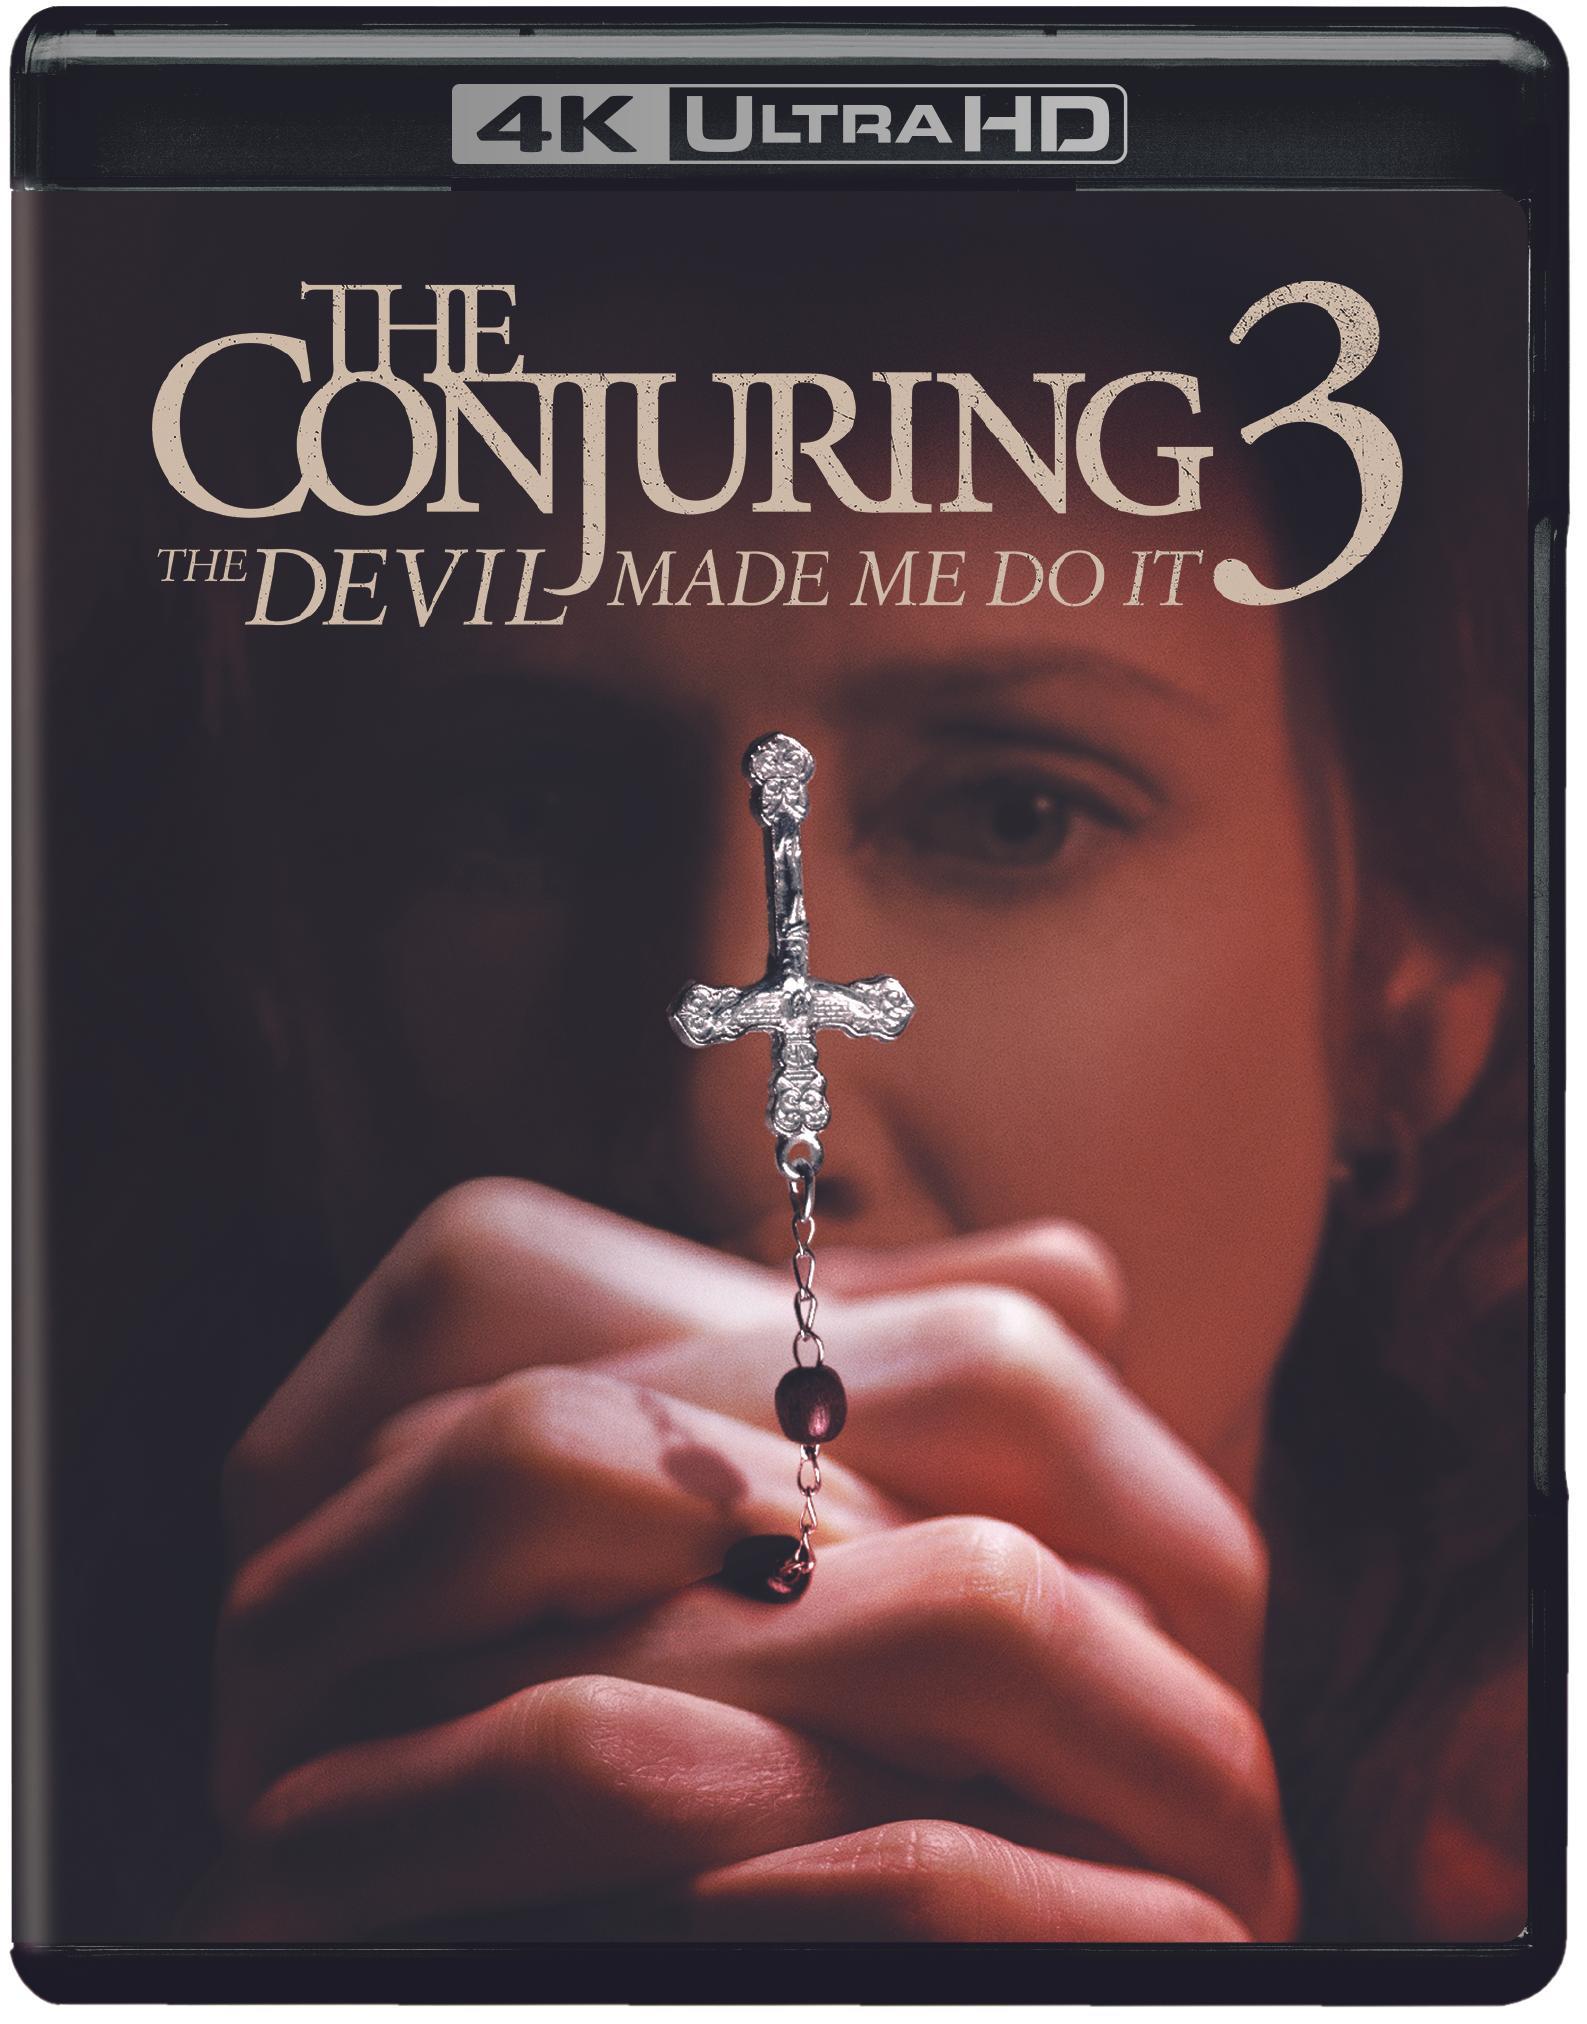 The Conjuring: The Devil Made Me Do It (4K Ultra HD + Blu-ray) - UHD [ 2021 ]  - Horror Movies On 4K Ultra HD Blu-ray - Movies On GRUV